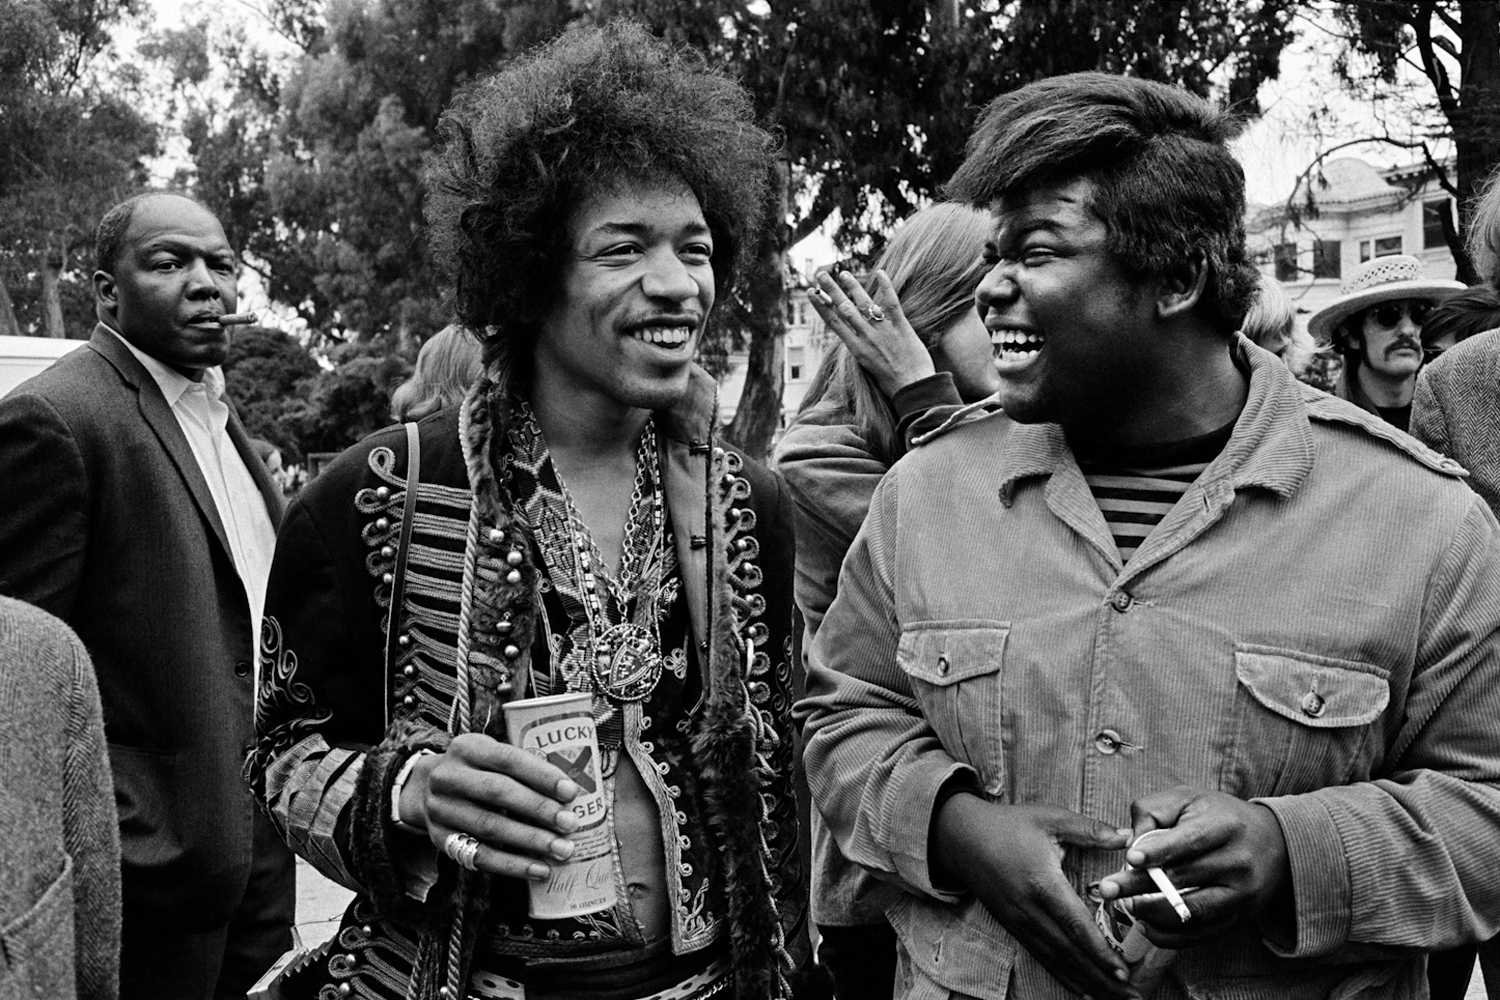 Image: Jimi Hendrix and Buddy Miles at The Panhandle Free Concert, San Francisco, 1967